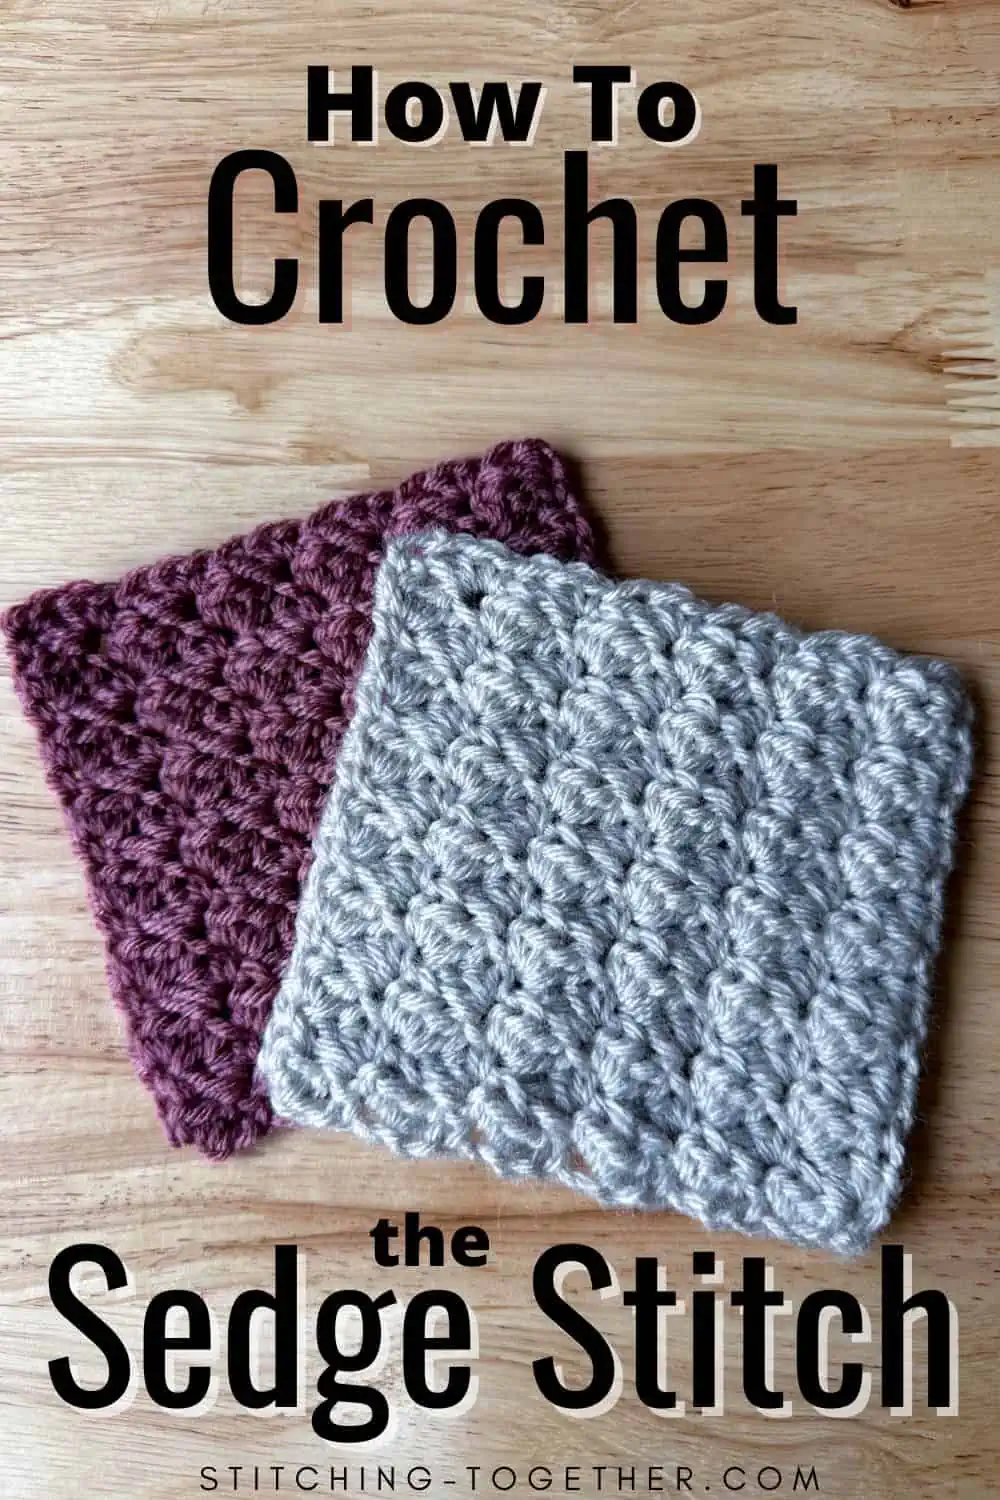 2 crochet swatches with text overlay reading "how to crochet the sedge stitch"